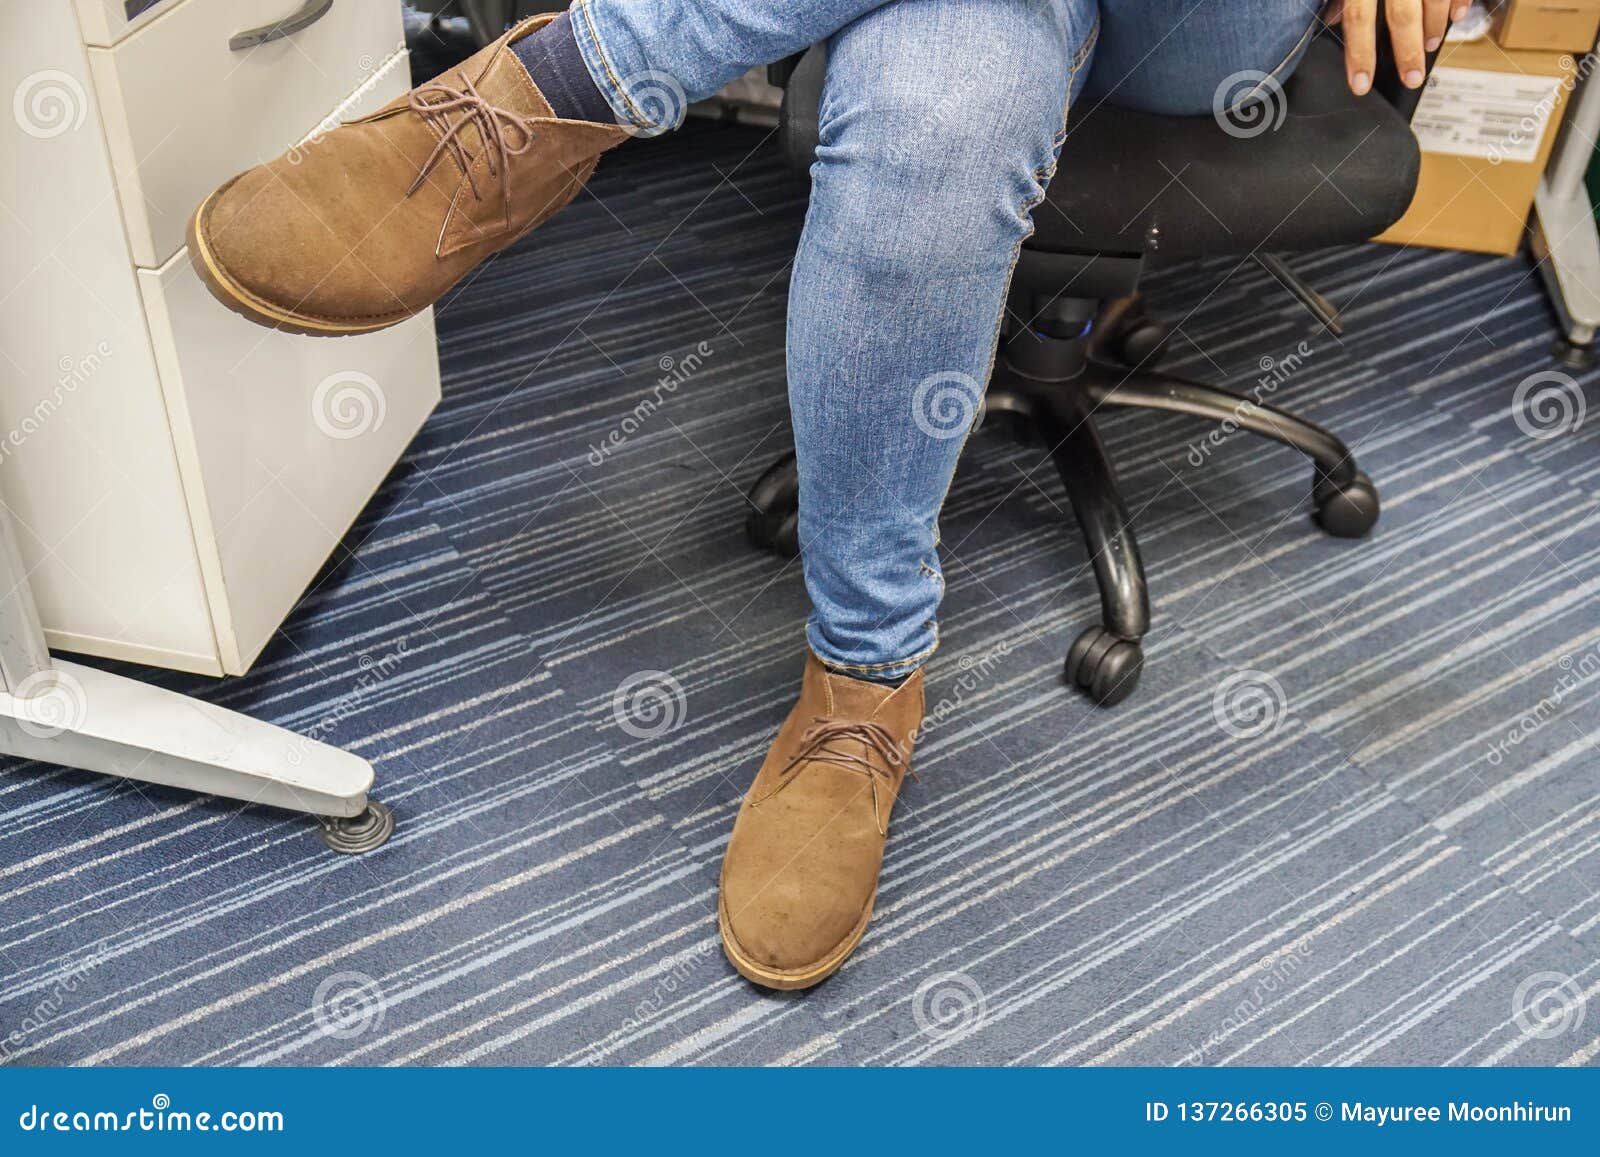 office shoes with jeans